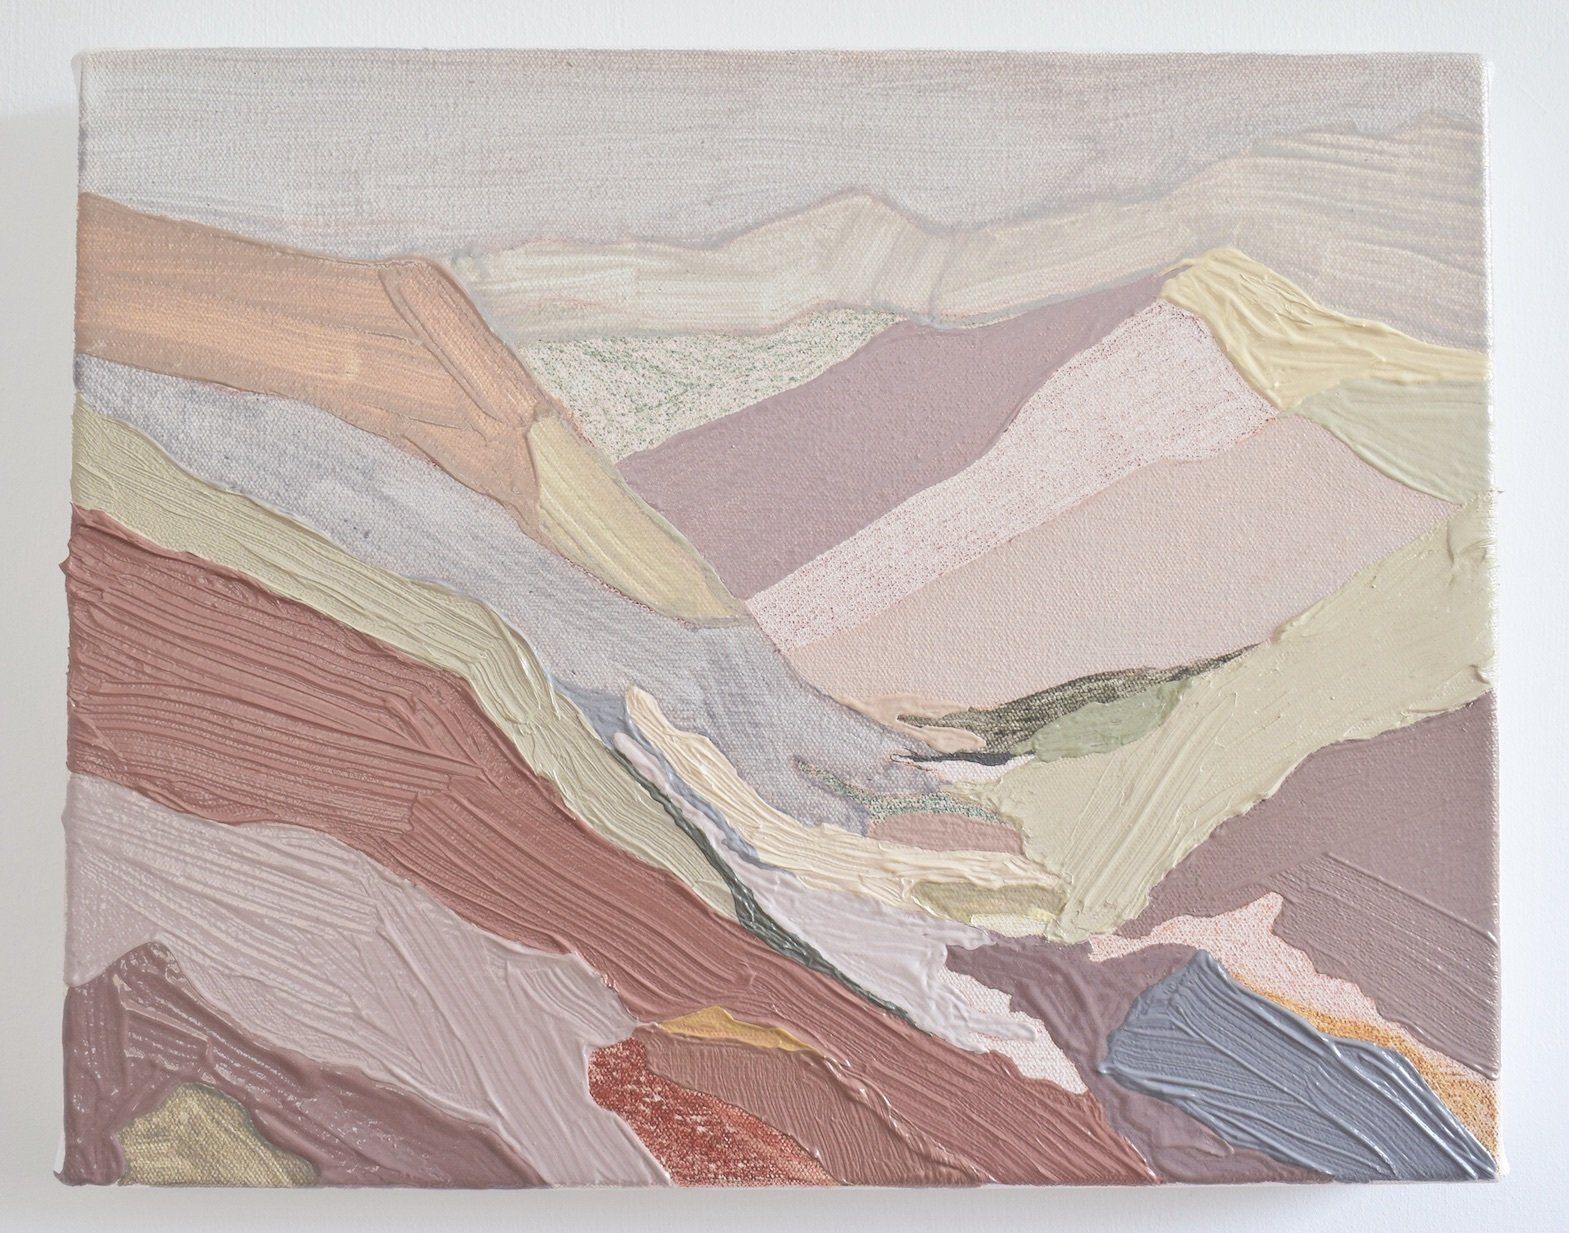 Detailed photographs of an abstract landscape painting showing colourful thick paint